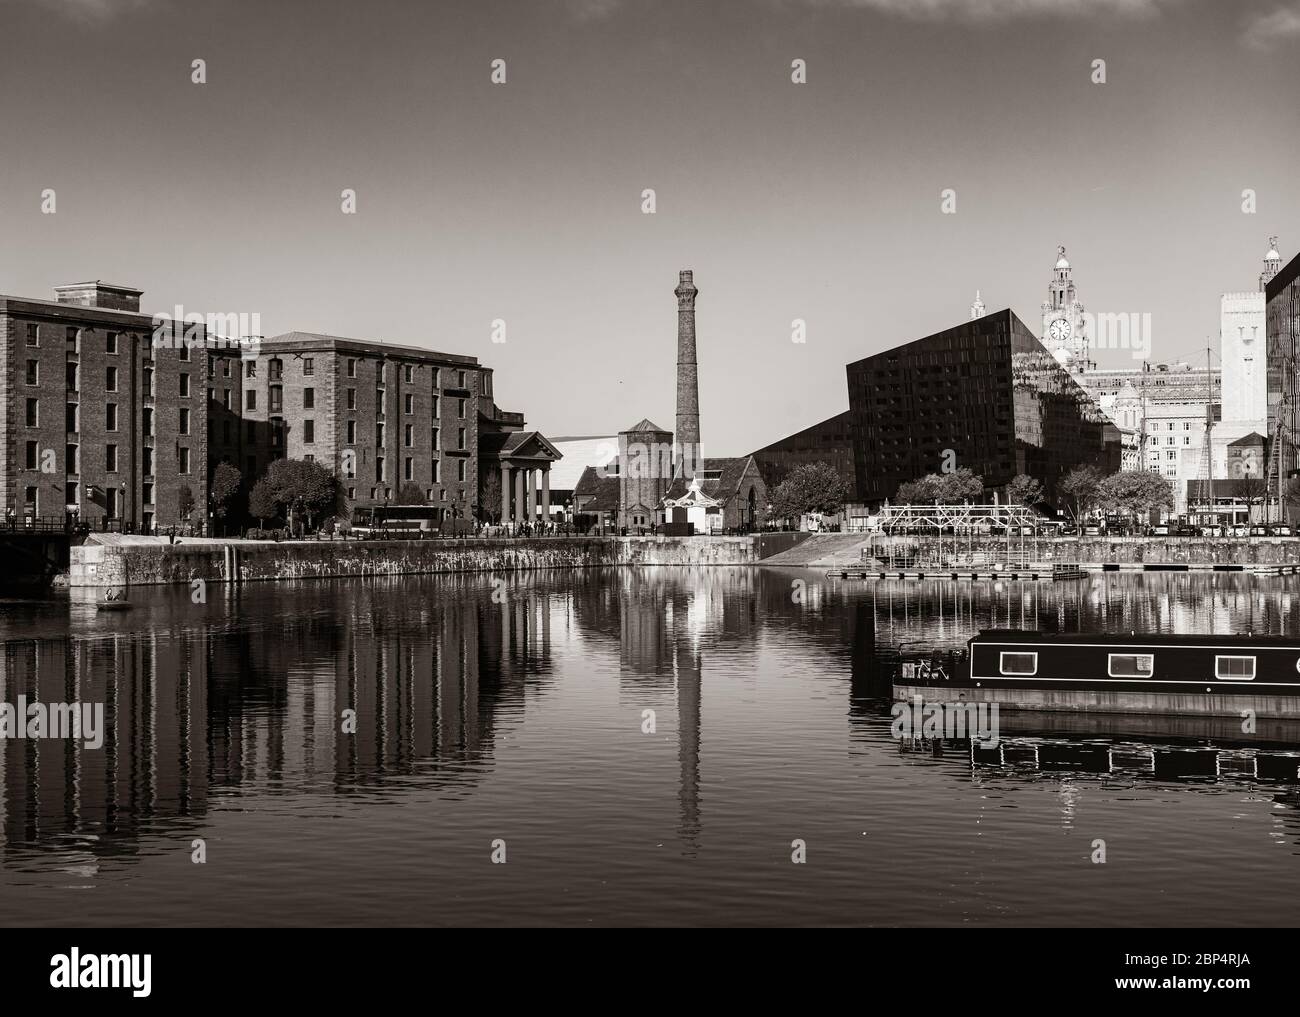 Royal Albert Dock with historical buildings in England, United Kingdom ...